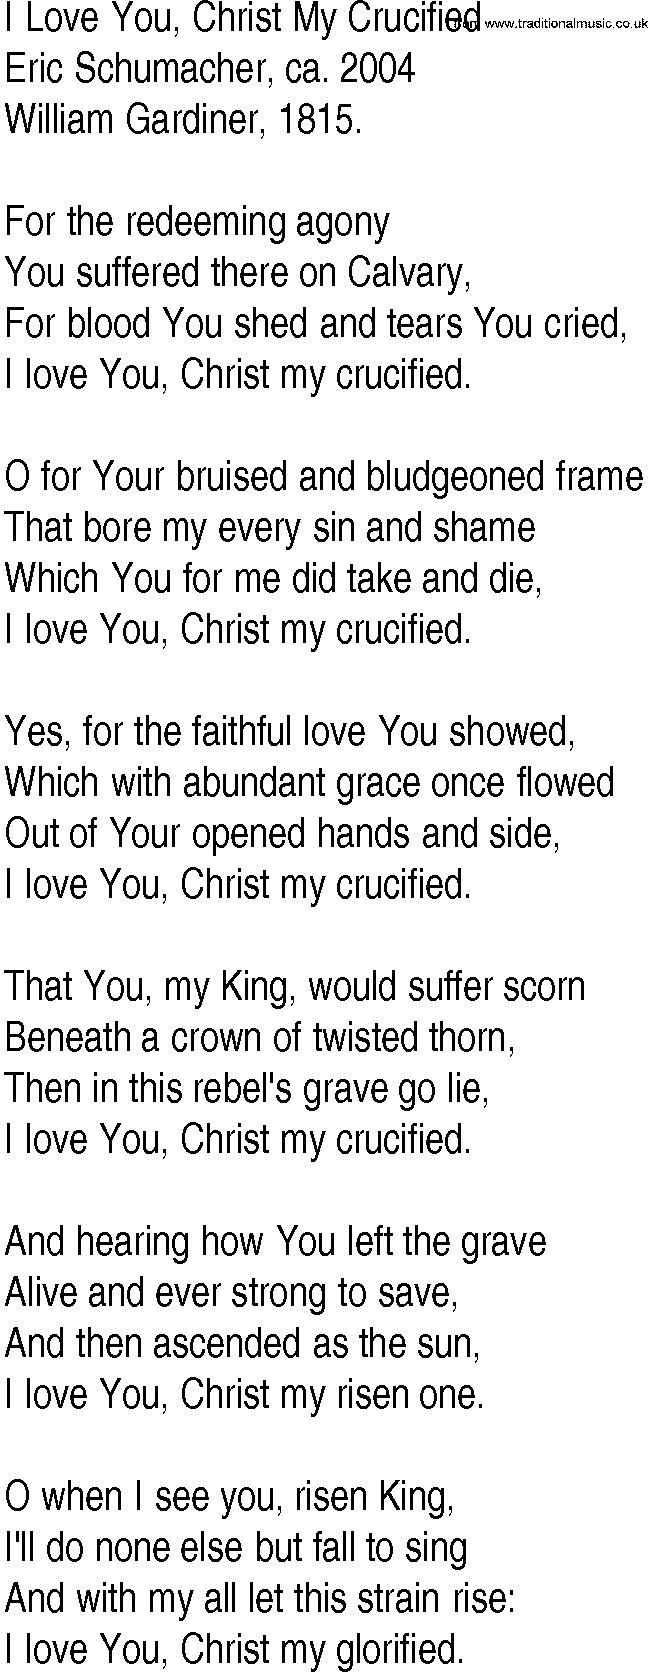 Hymn and Gospel Song: I Love You, Christ My Crucified by Eric Schumacher ca lyrics